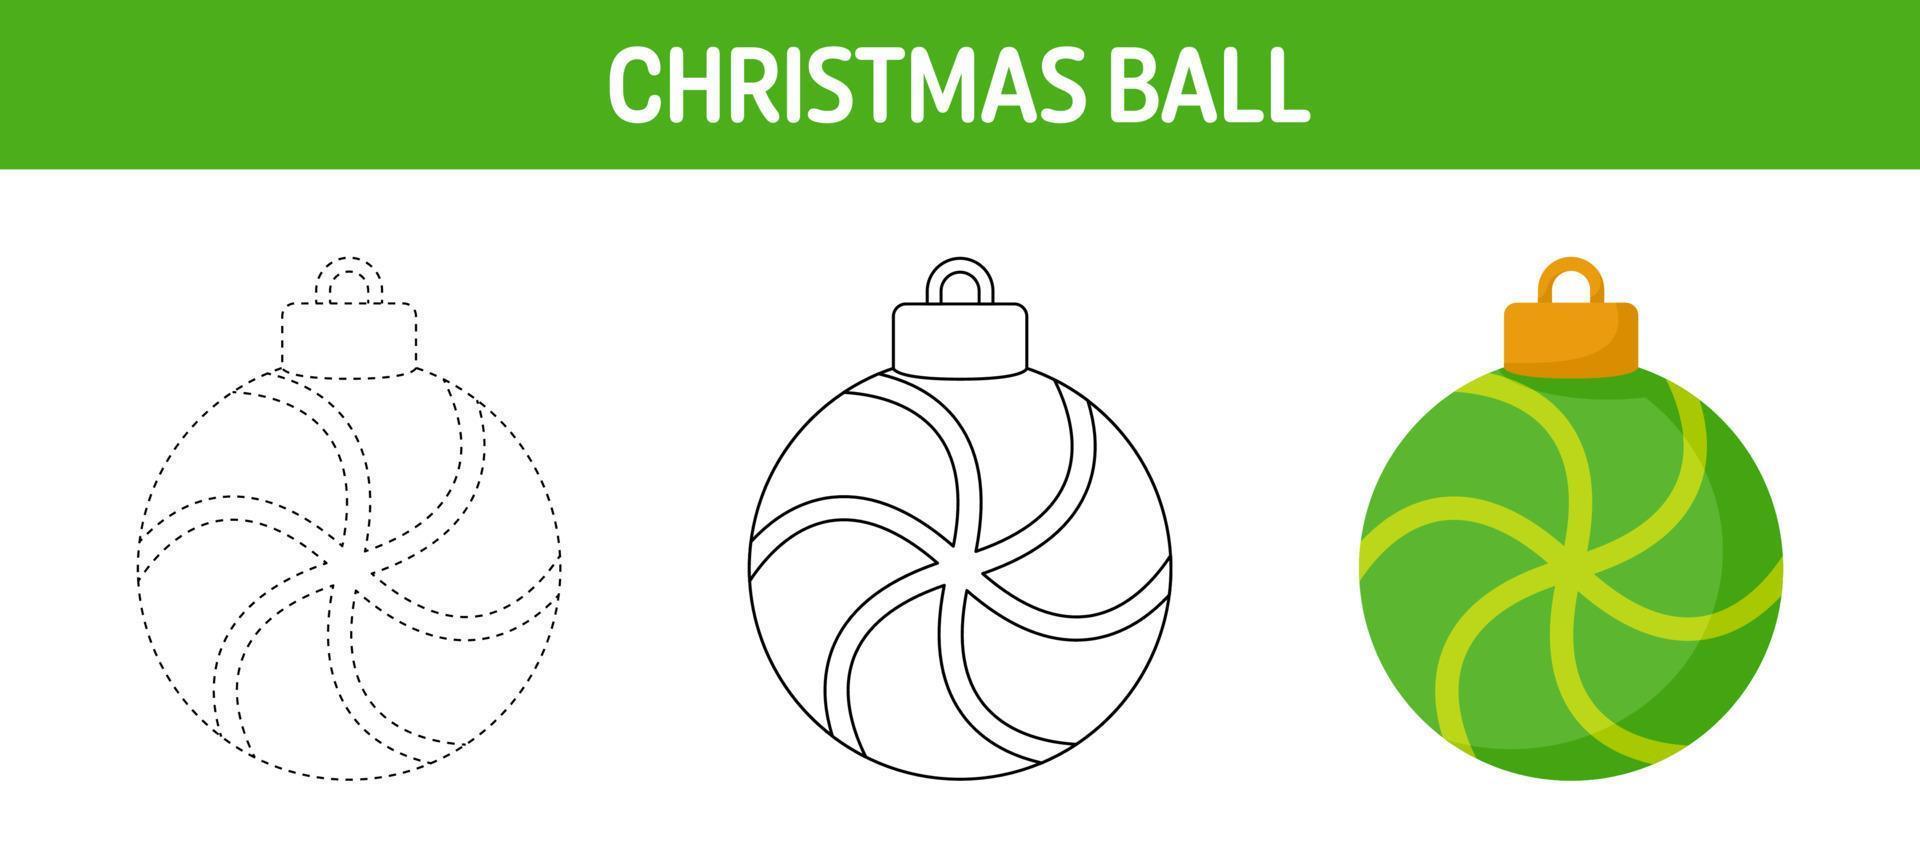 Christmas Ball tracing and coloring worksheet for kids vector